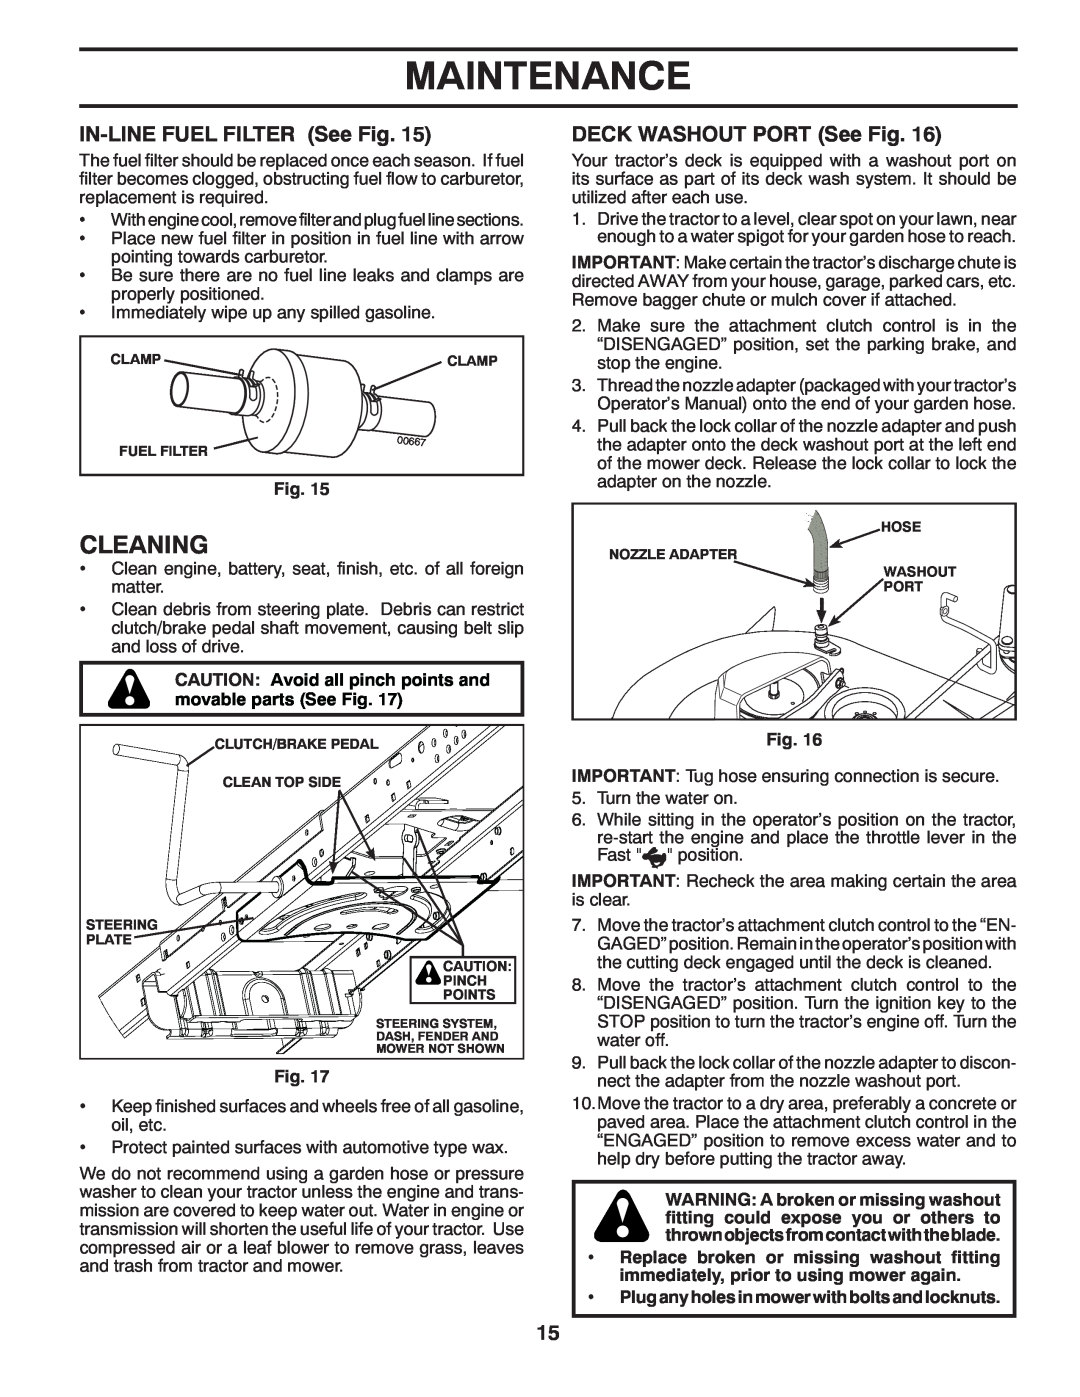 McCulloch MC2042YT (96042011500) manual Cleaning, IN-LINE FUEL FILTER See Fig, DECK WASHOUT PORT See Fig, Maintenance 